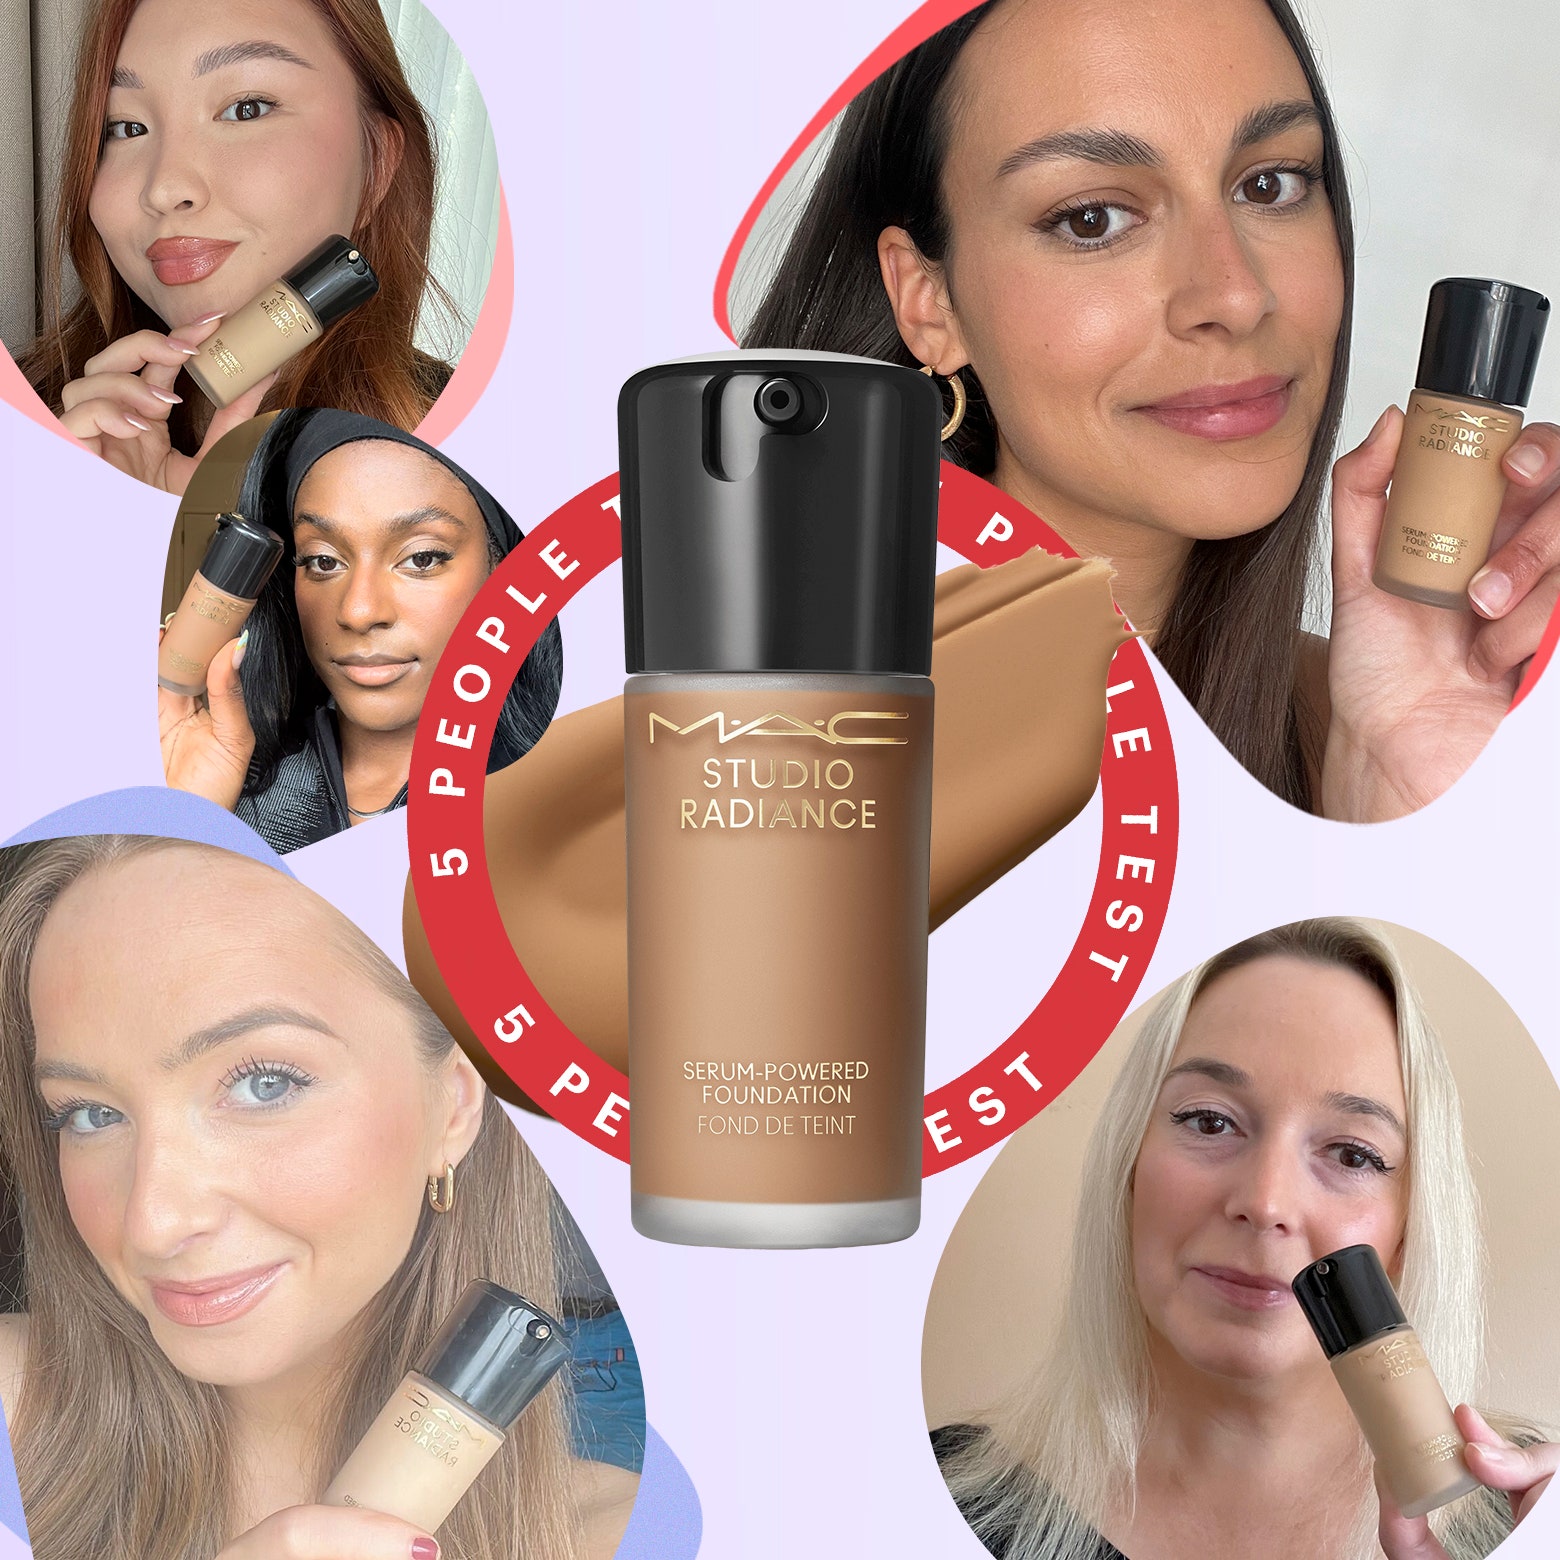 Did this MAC Cosmetics Foundation just give the whole GLAMOUR team dewy, stargazing skin?